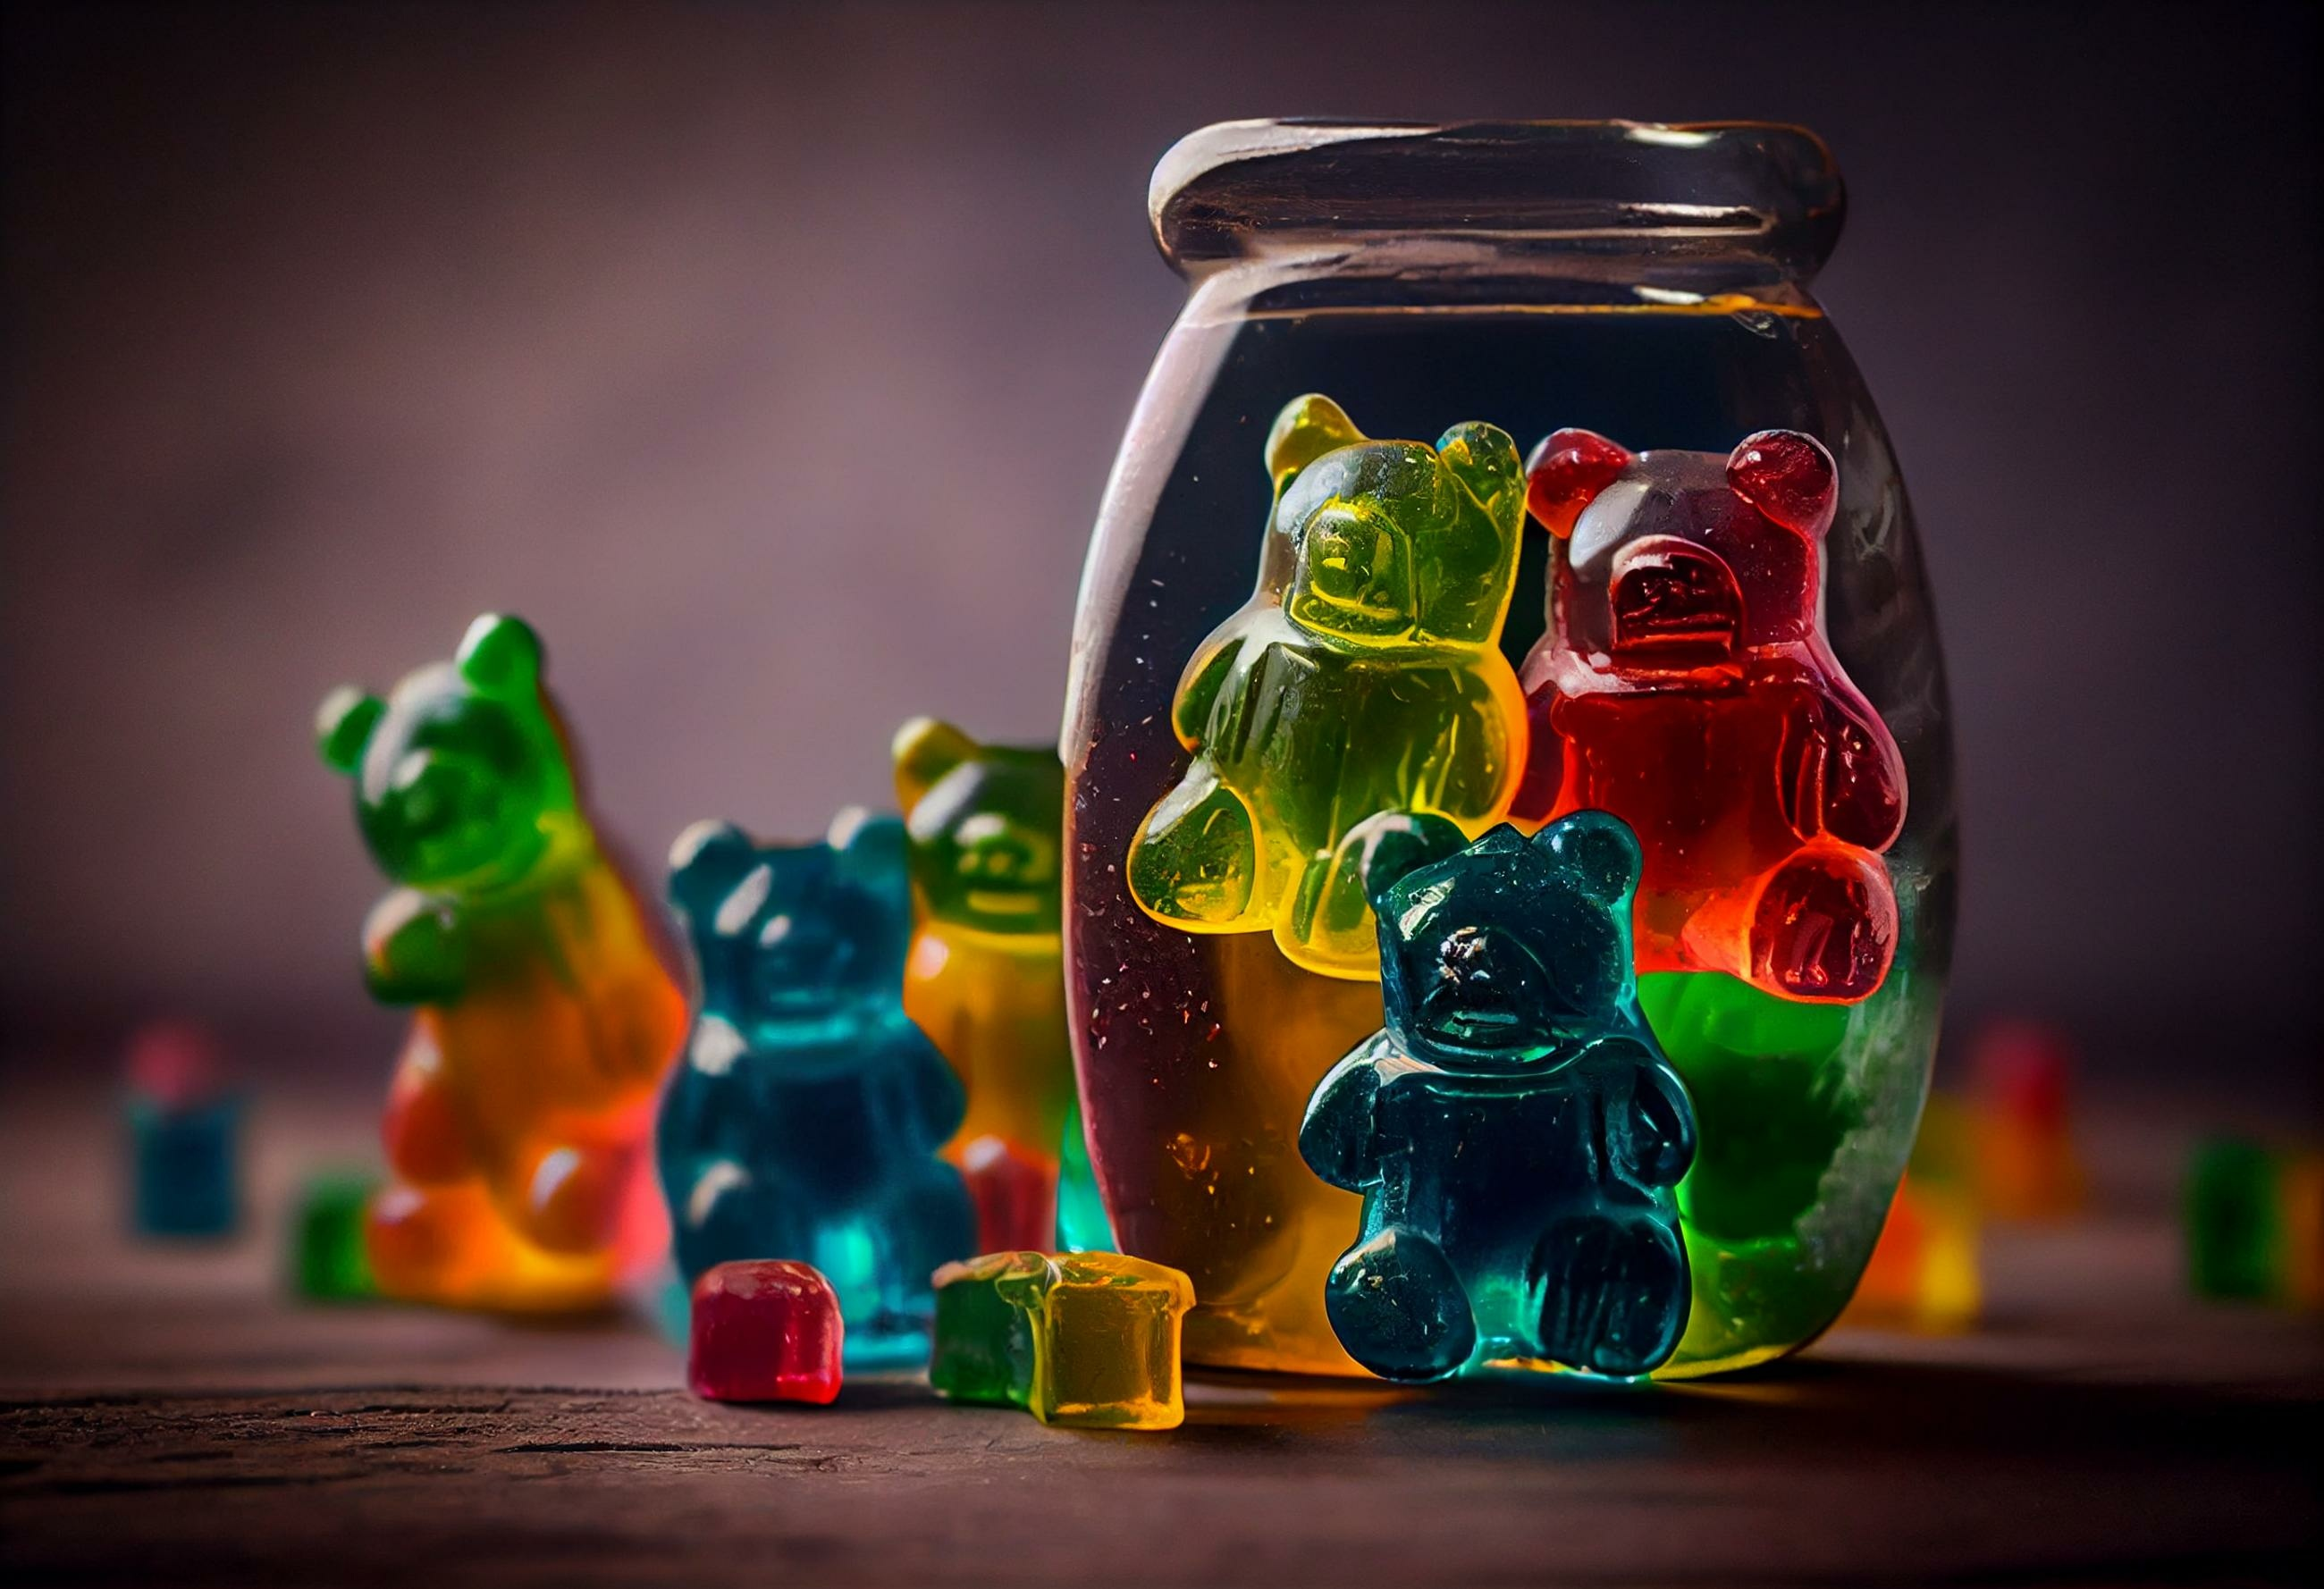 Delta 8 gummies can be a fun way to consume your cannabis. From seeking potential benefits to enjoying recreationally, Delta 8 gummies are a fun option for consumers.